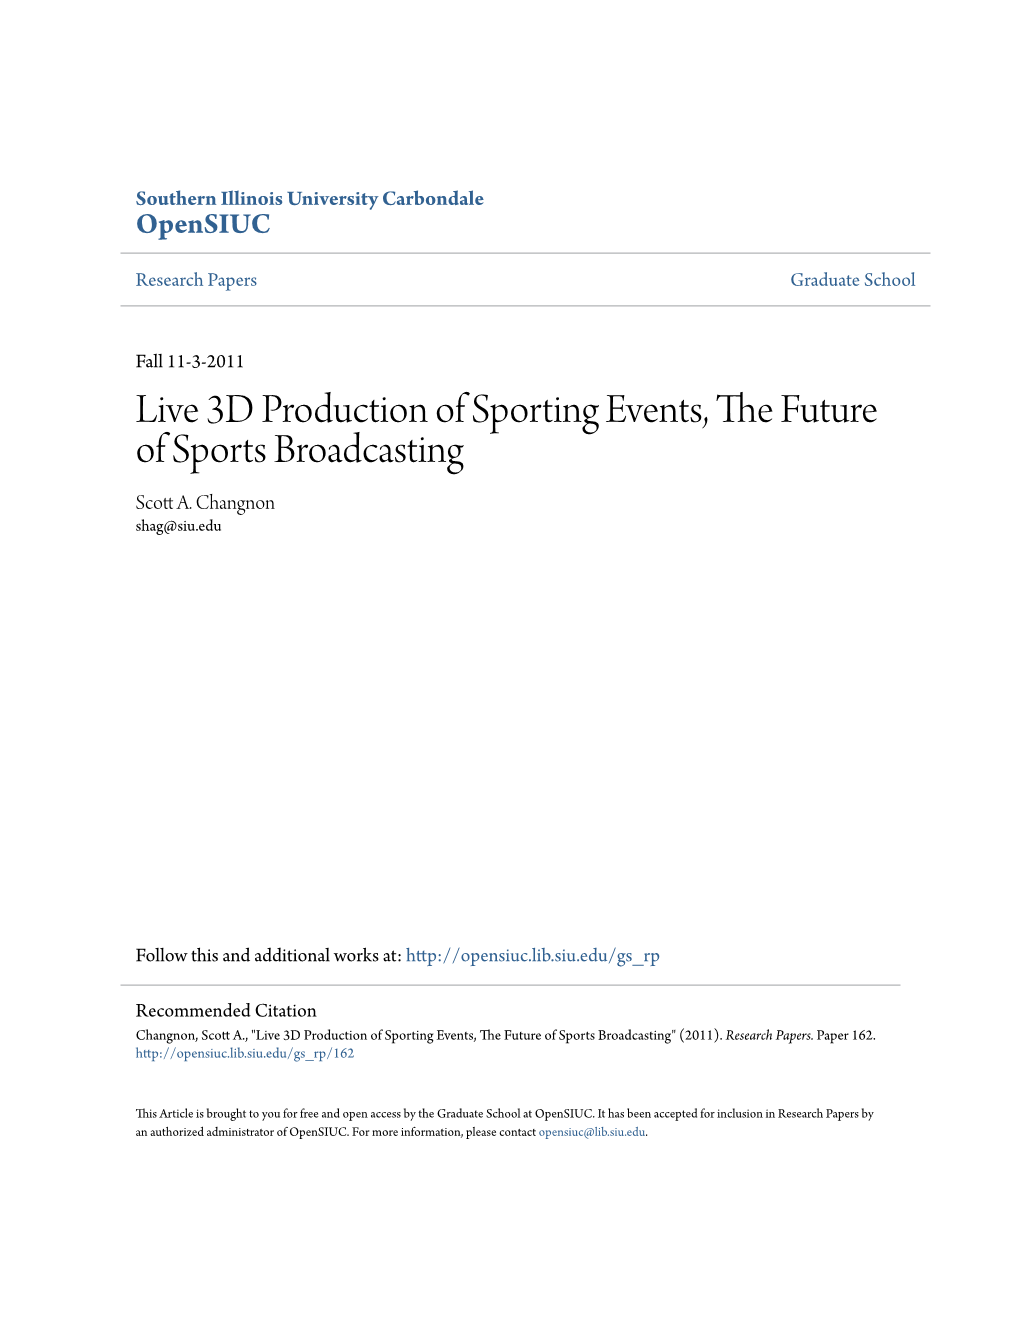 Live 3D Production of Sporting Events, the Future of Sports Broadcasting